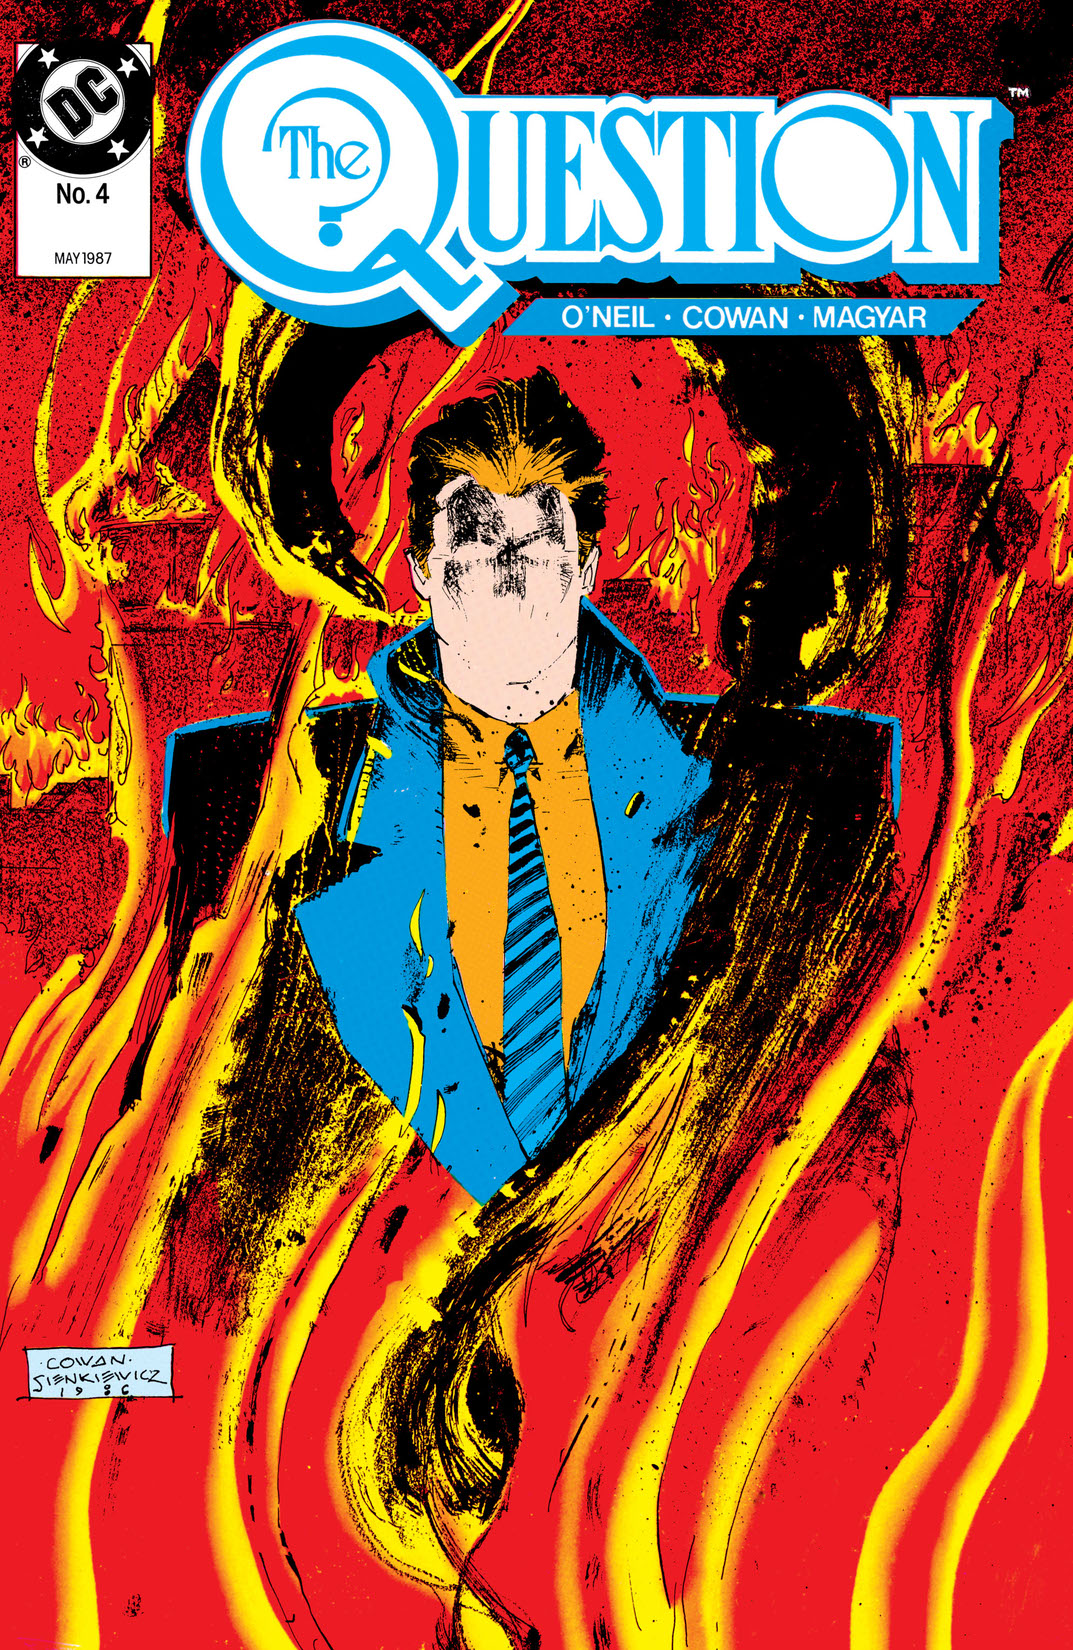 The Question (1986-) #4 preview images